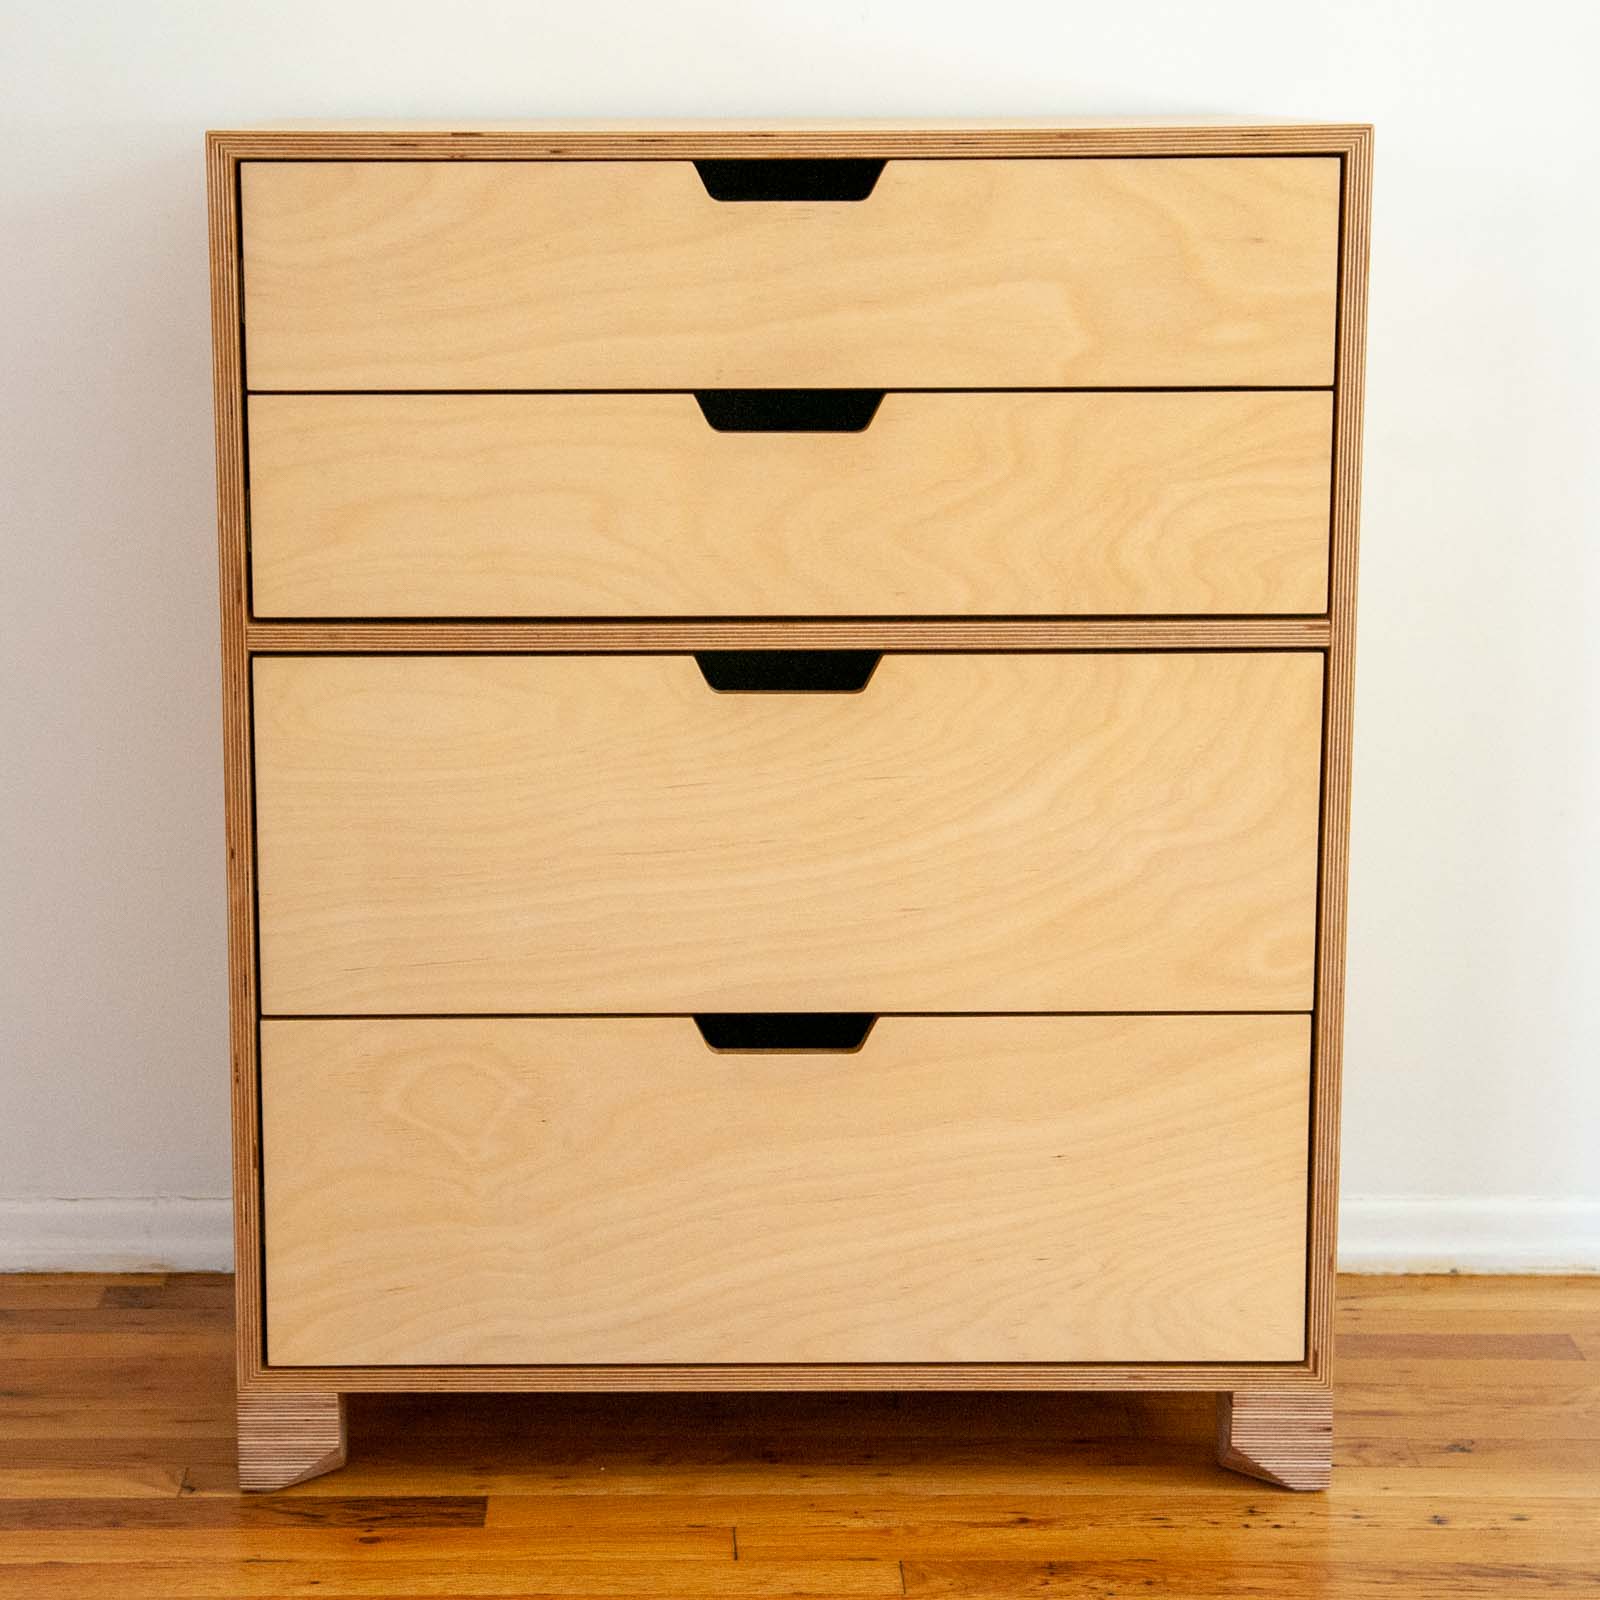 Dresser front view showing light wood-grain pattern on drawer faces